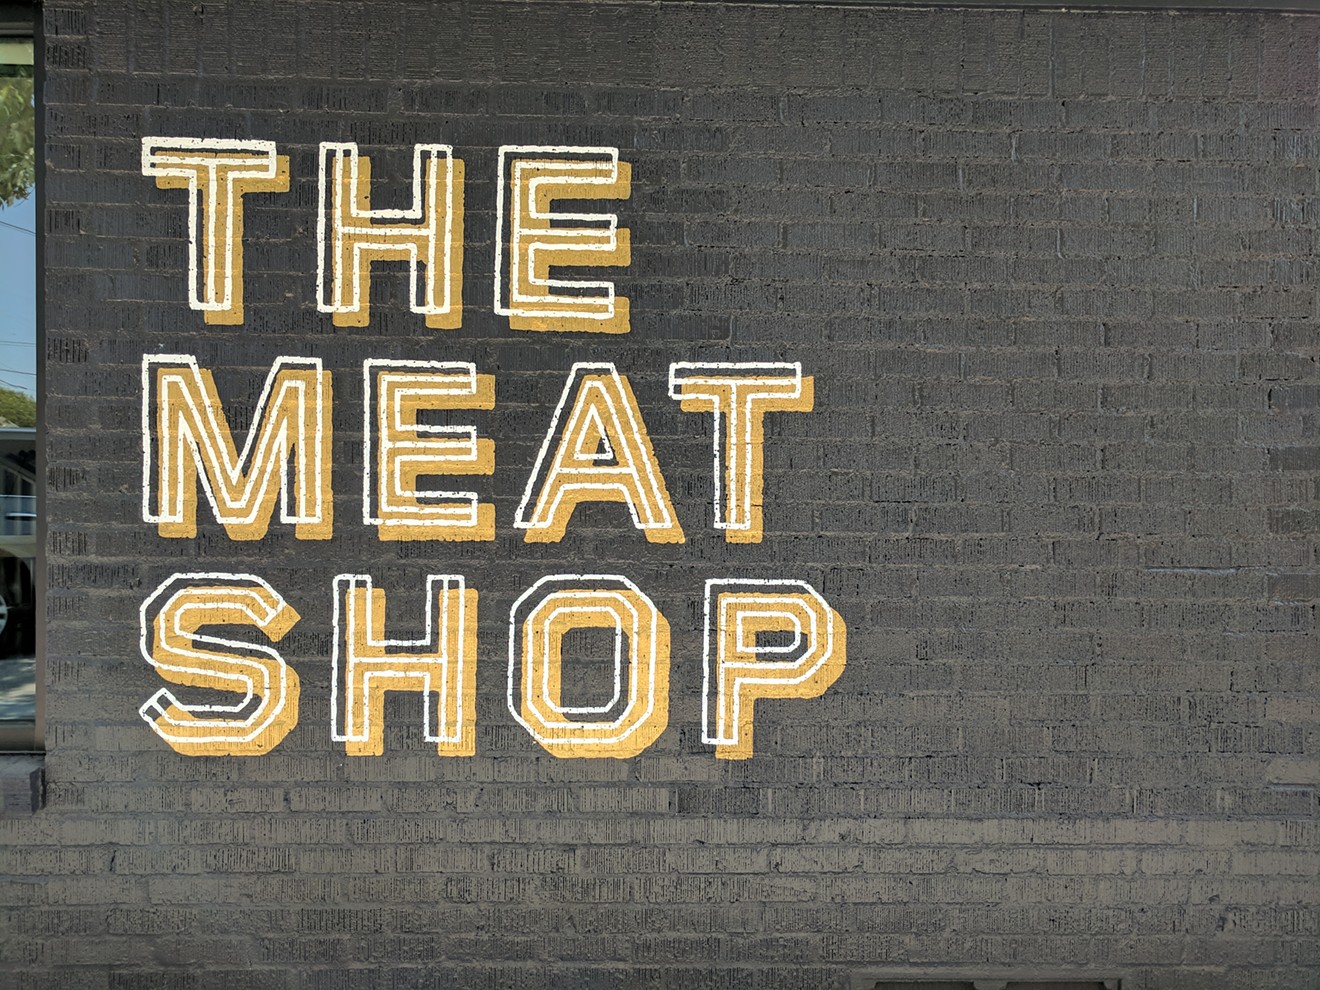 High-quality neighborhood butcher shops such as The Meat Shop are looking like a very welcome Dallas trend.